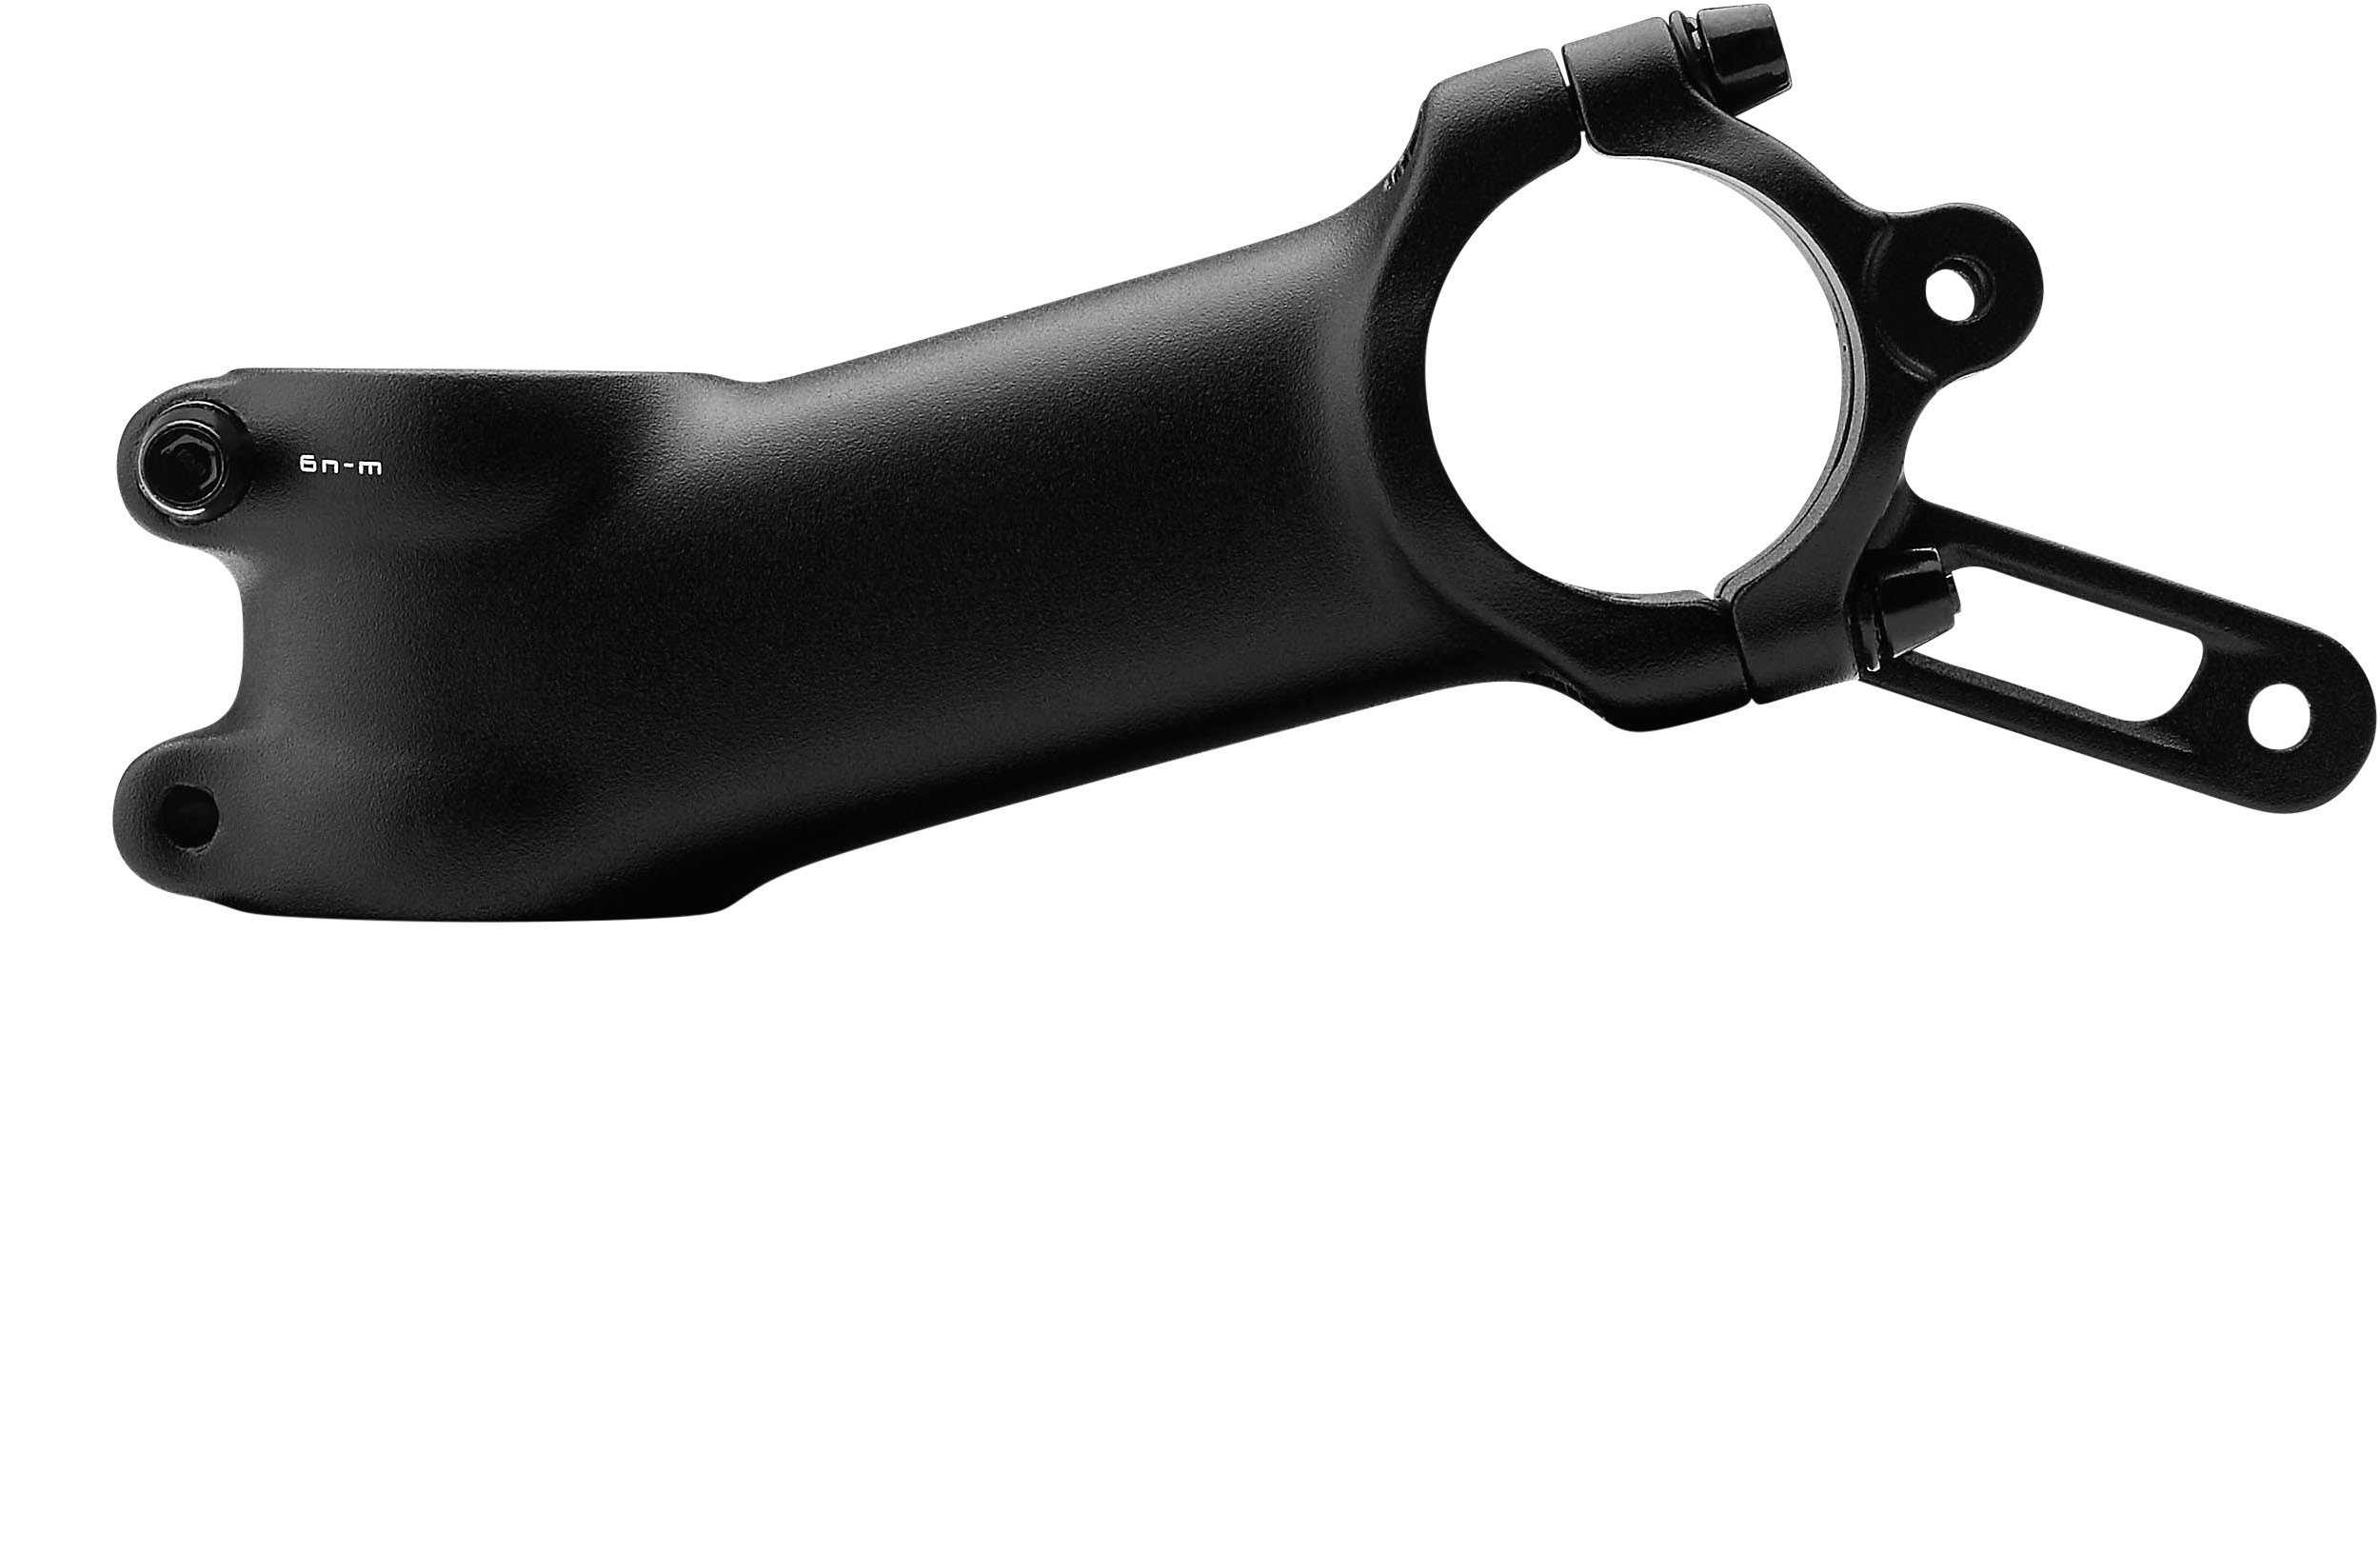 specialized light mount